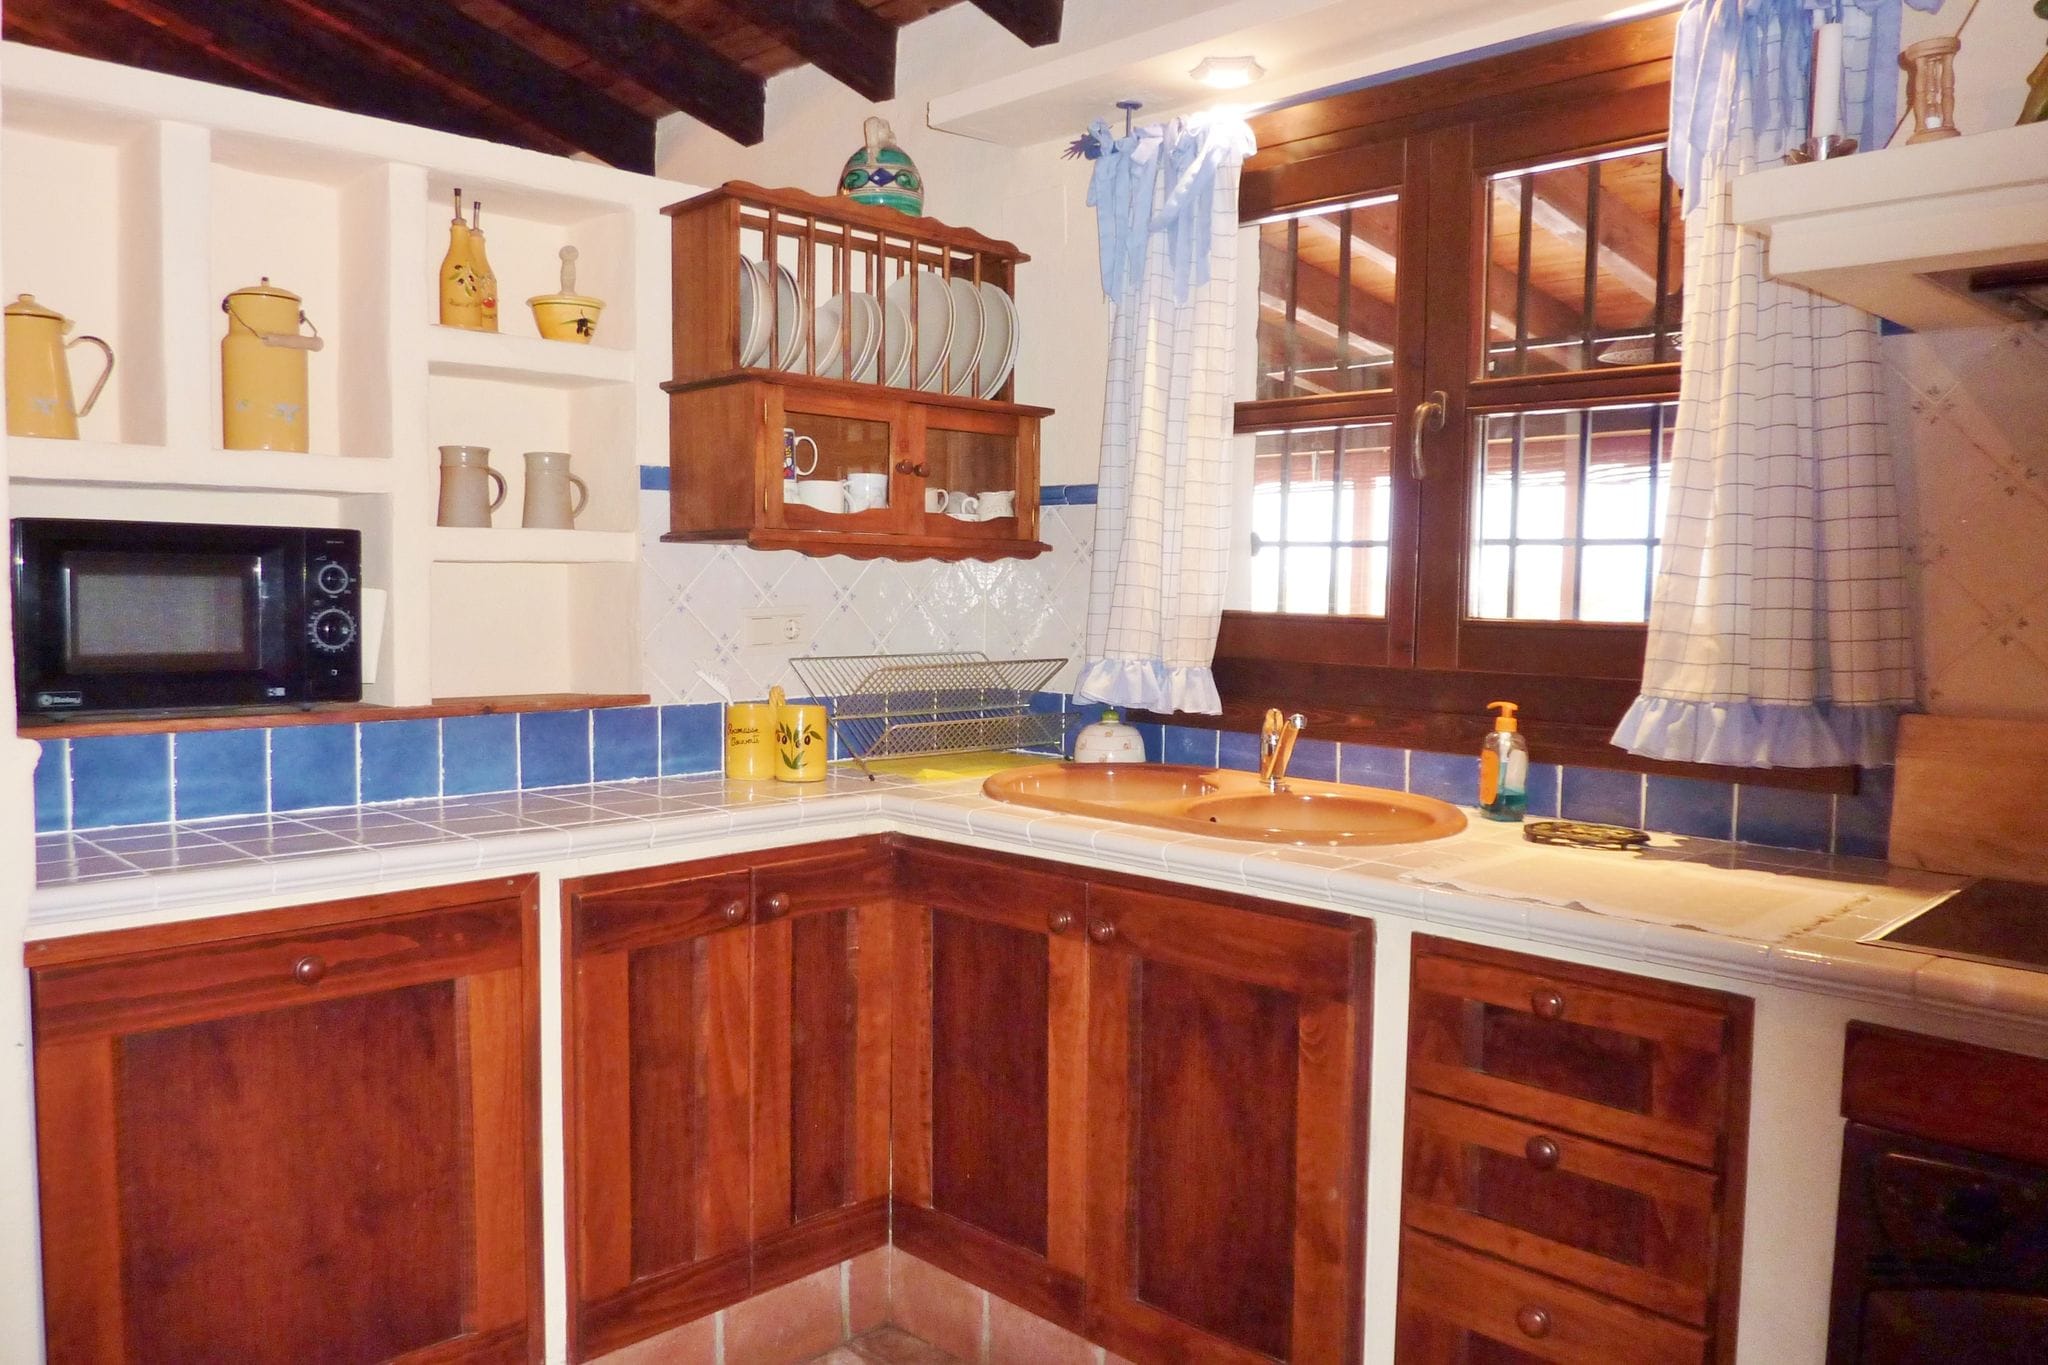 Luxurious Villa in Antequera with Private Pool